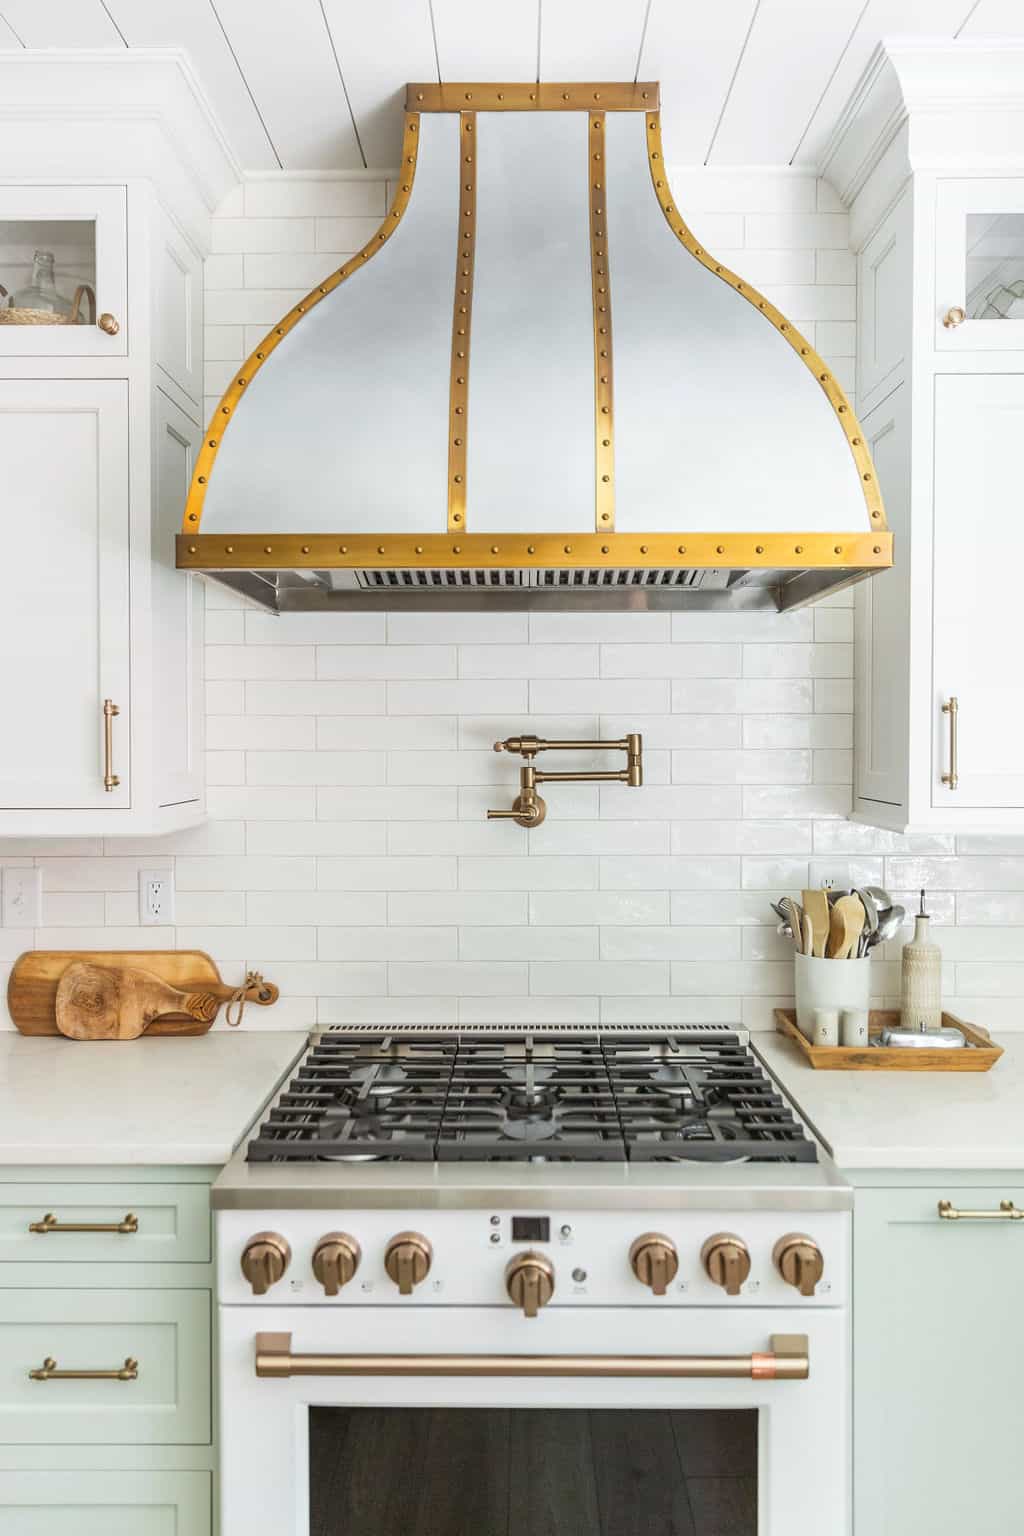 Nicholas Design Build | Elegant kitchen with a stylish brass-trimmed range hood above a professional gas stove.